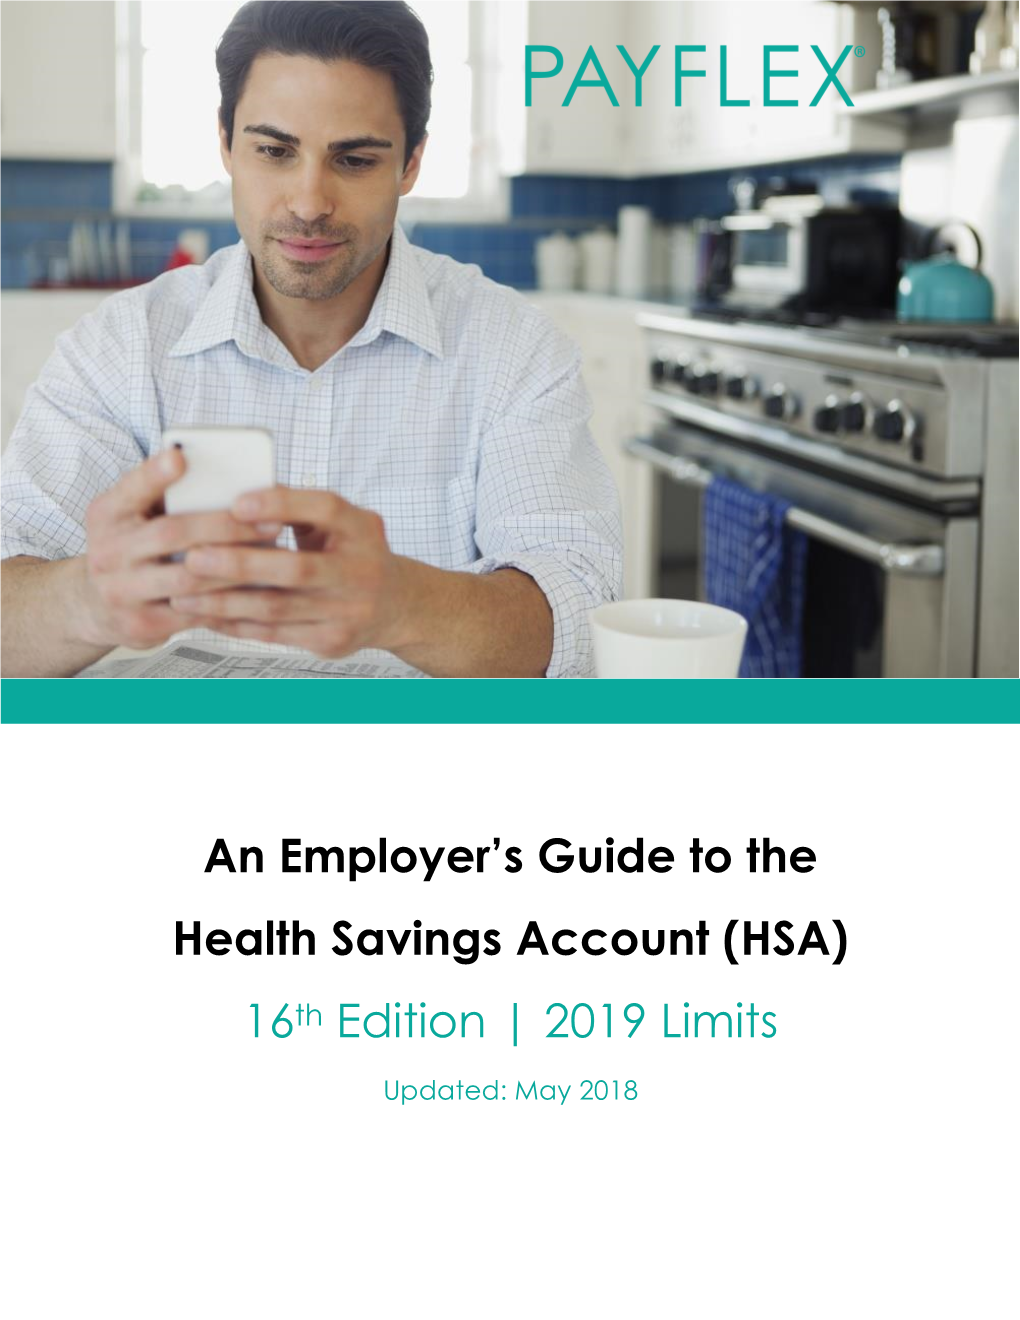 An Employer's Guide to the Health Savings Account (HSA) 16Th Edition | 2019 Limits